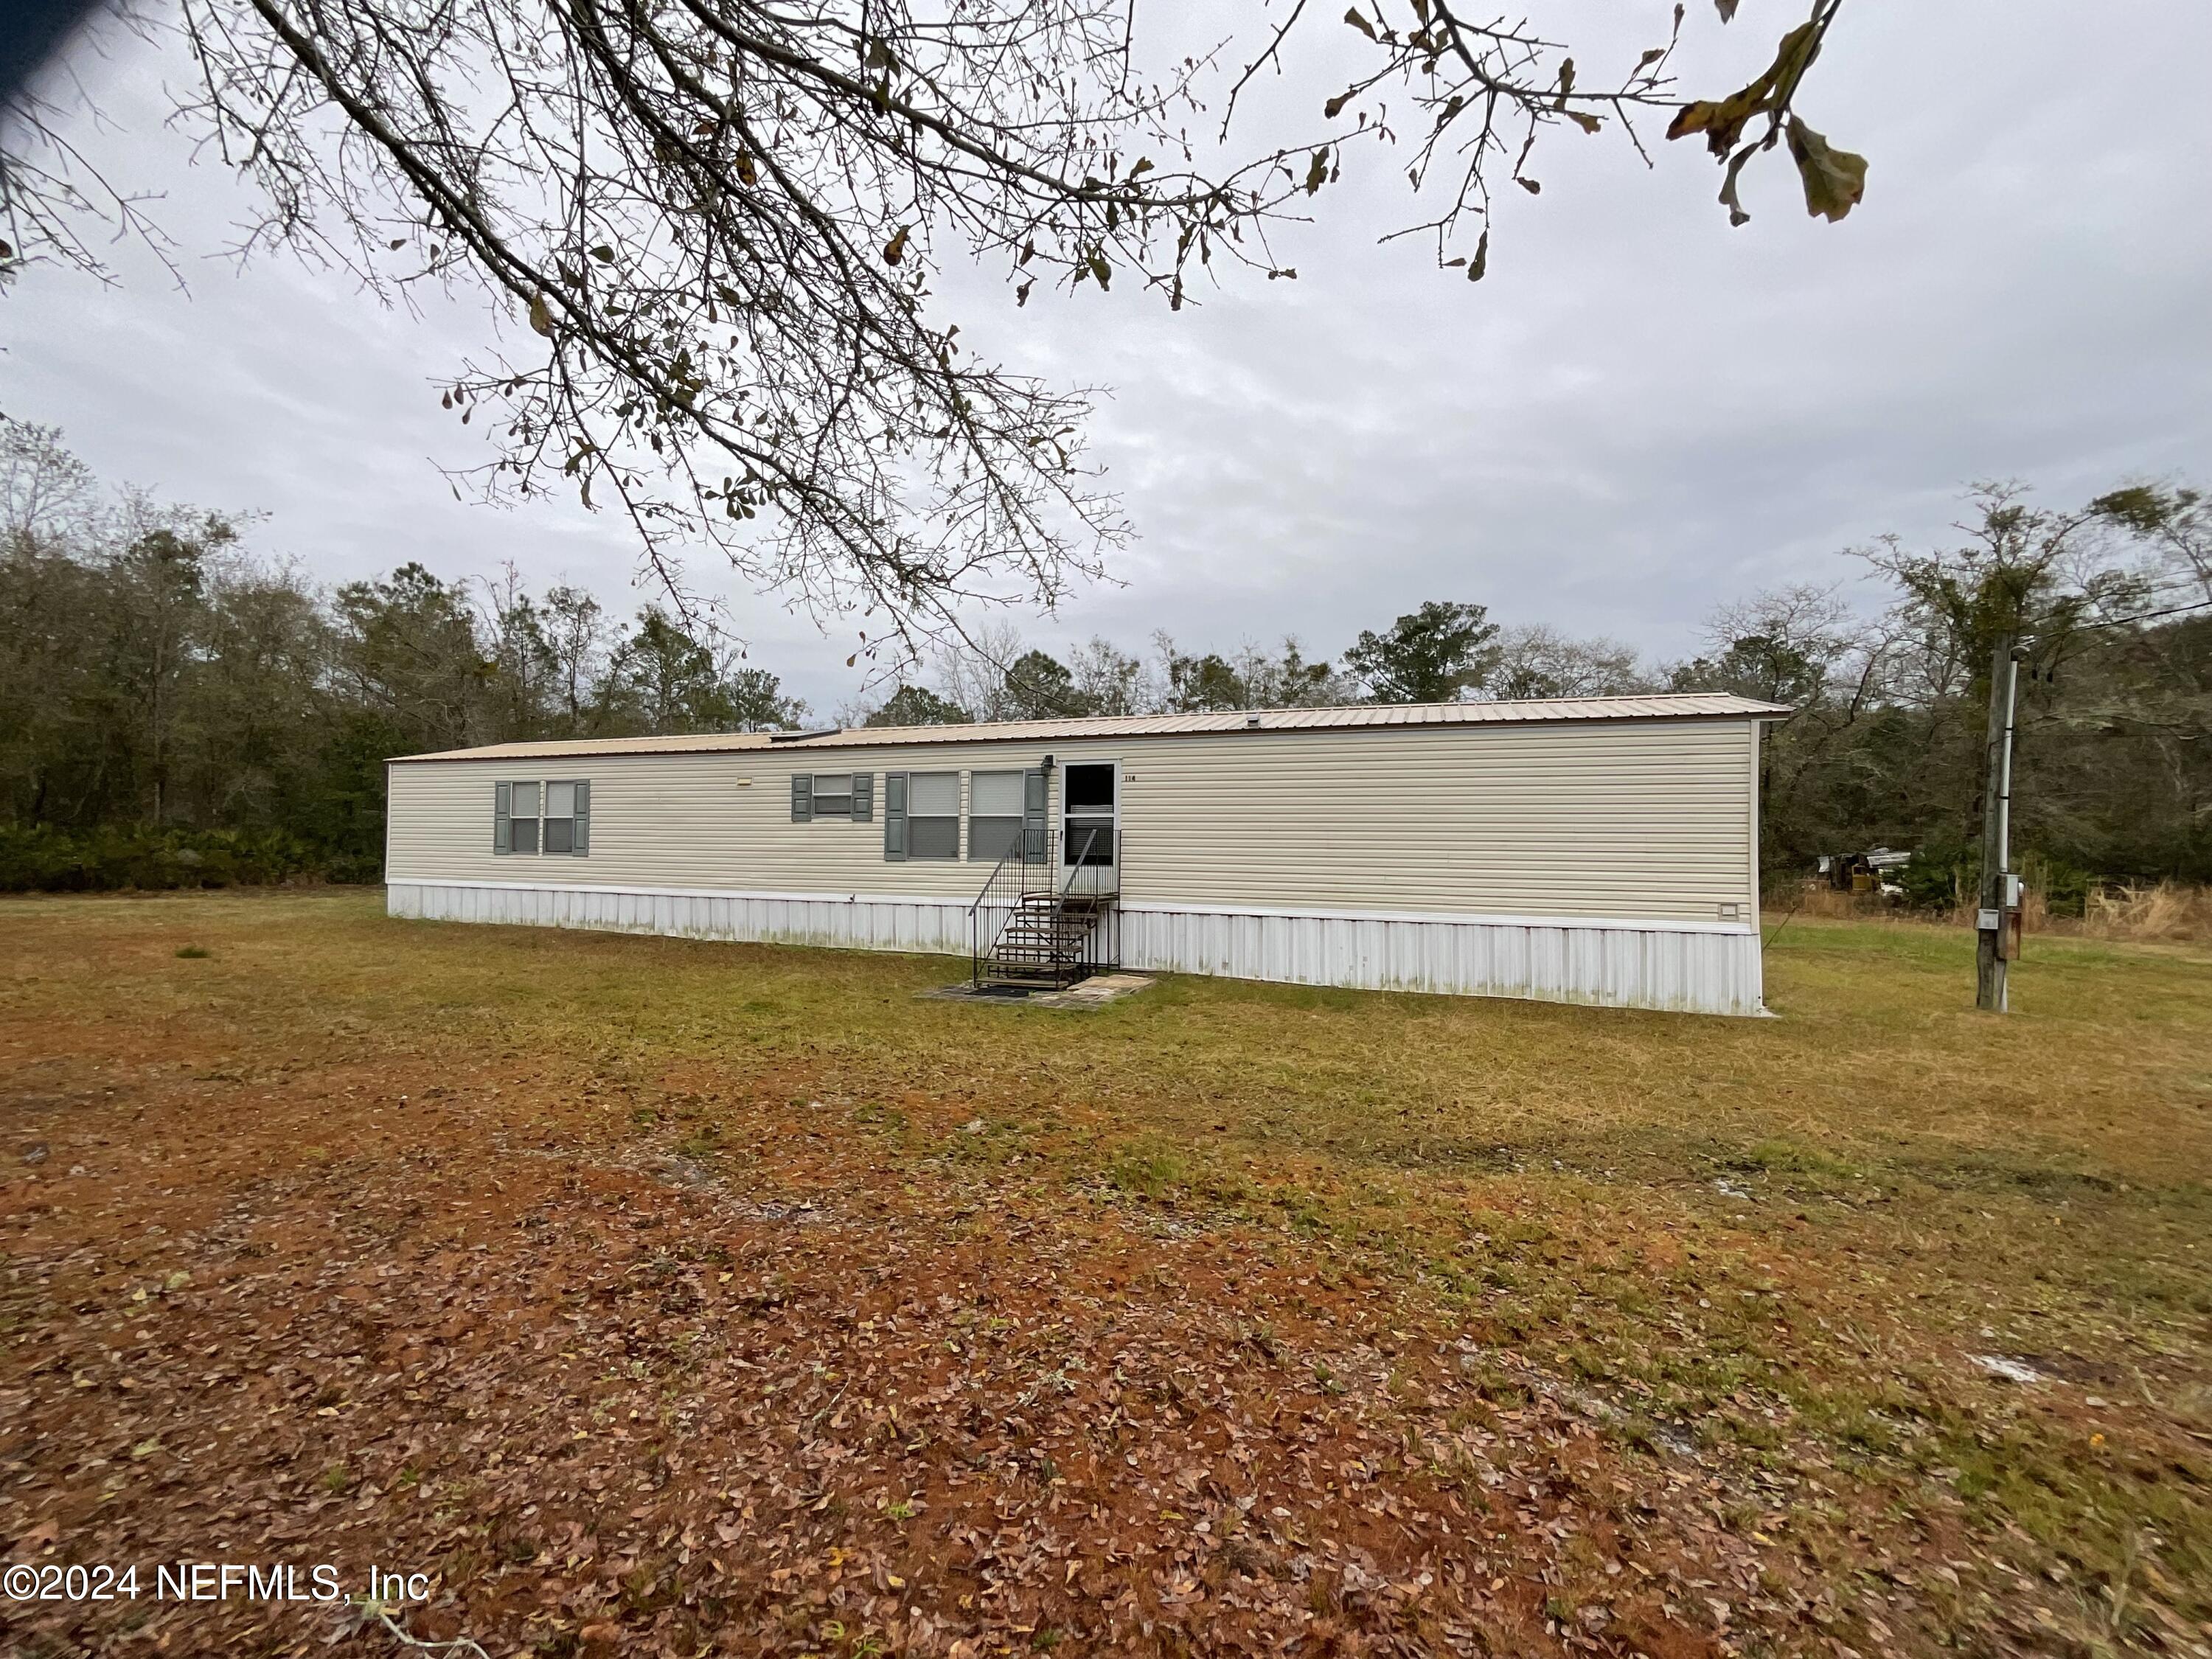 Palatka, FL home for sale located at 114 ROGERS Lane, Palatka, FL 32177